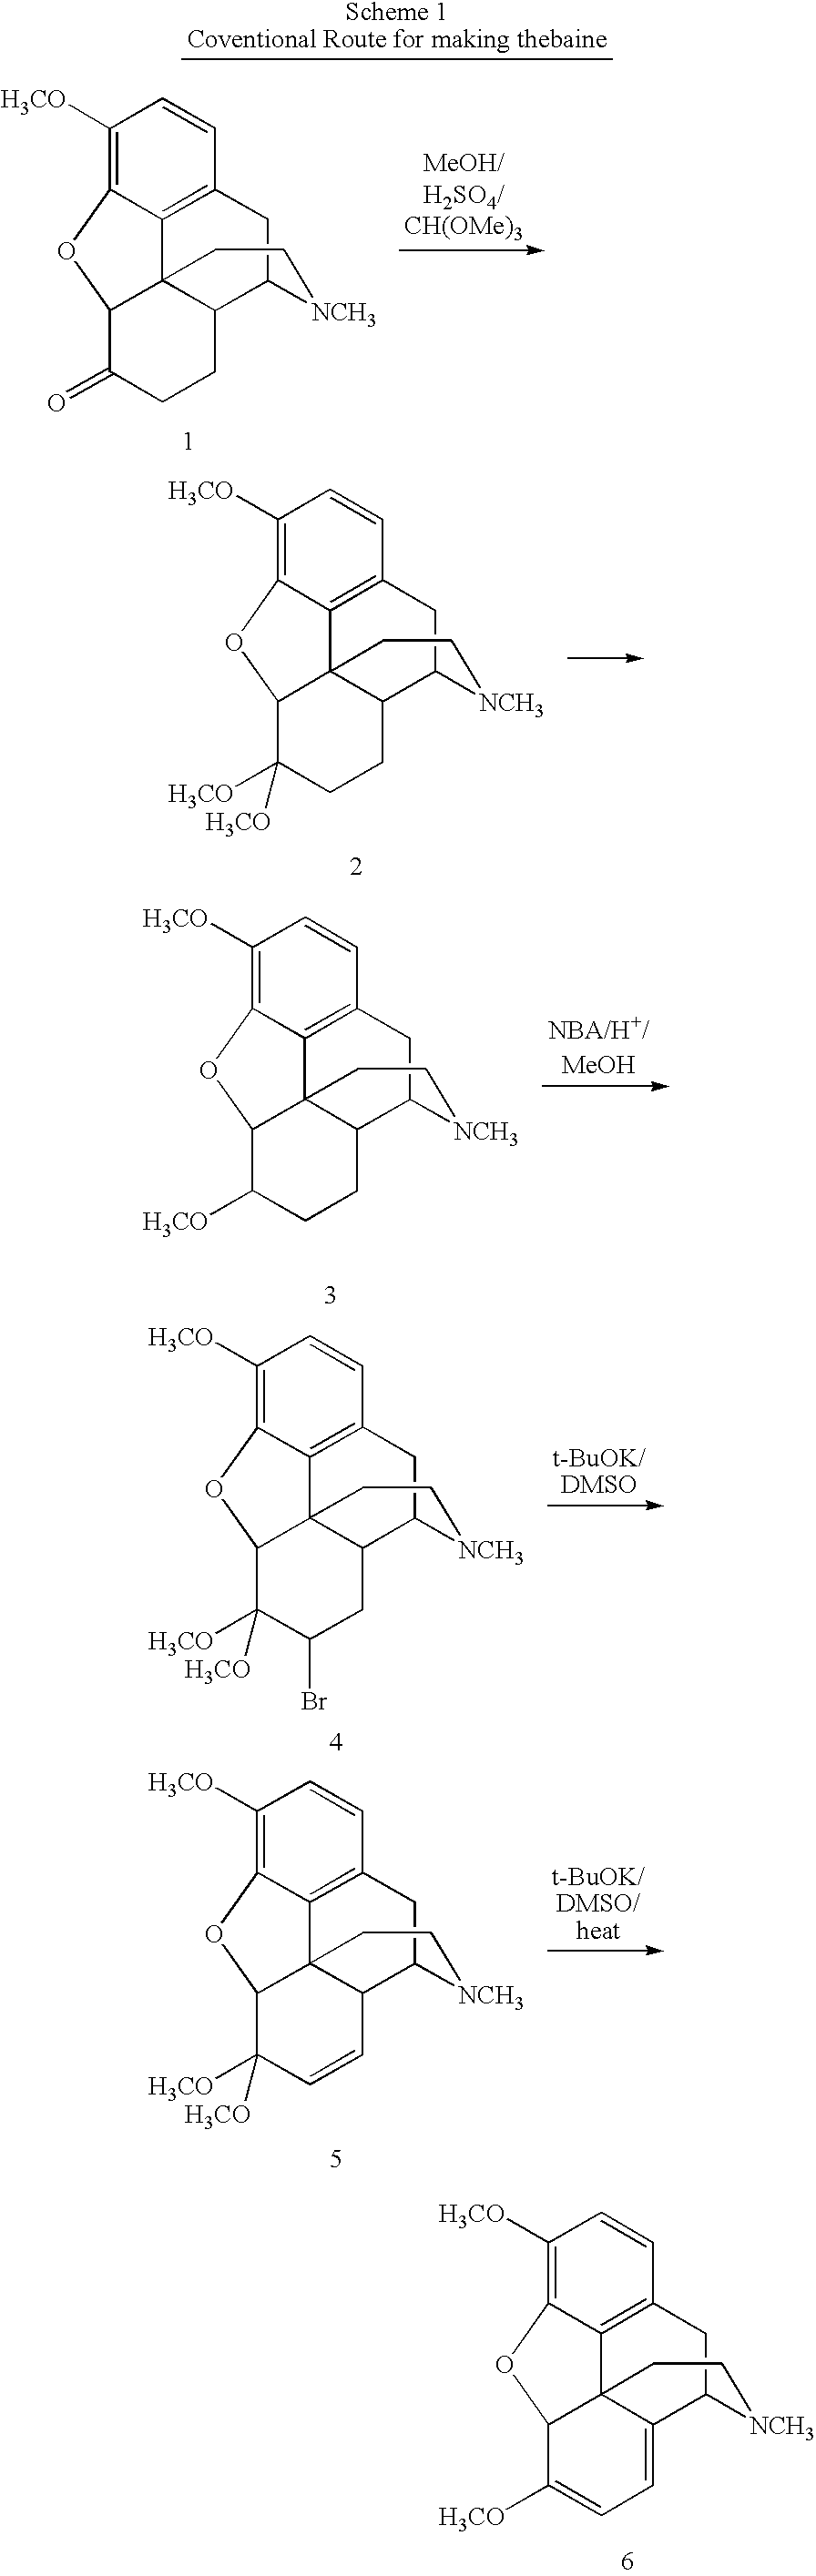 Synthetic Route to 14-Hydroxyl Opiates Through 1-Halo-Thebaine or Analogs